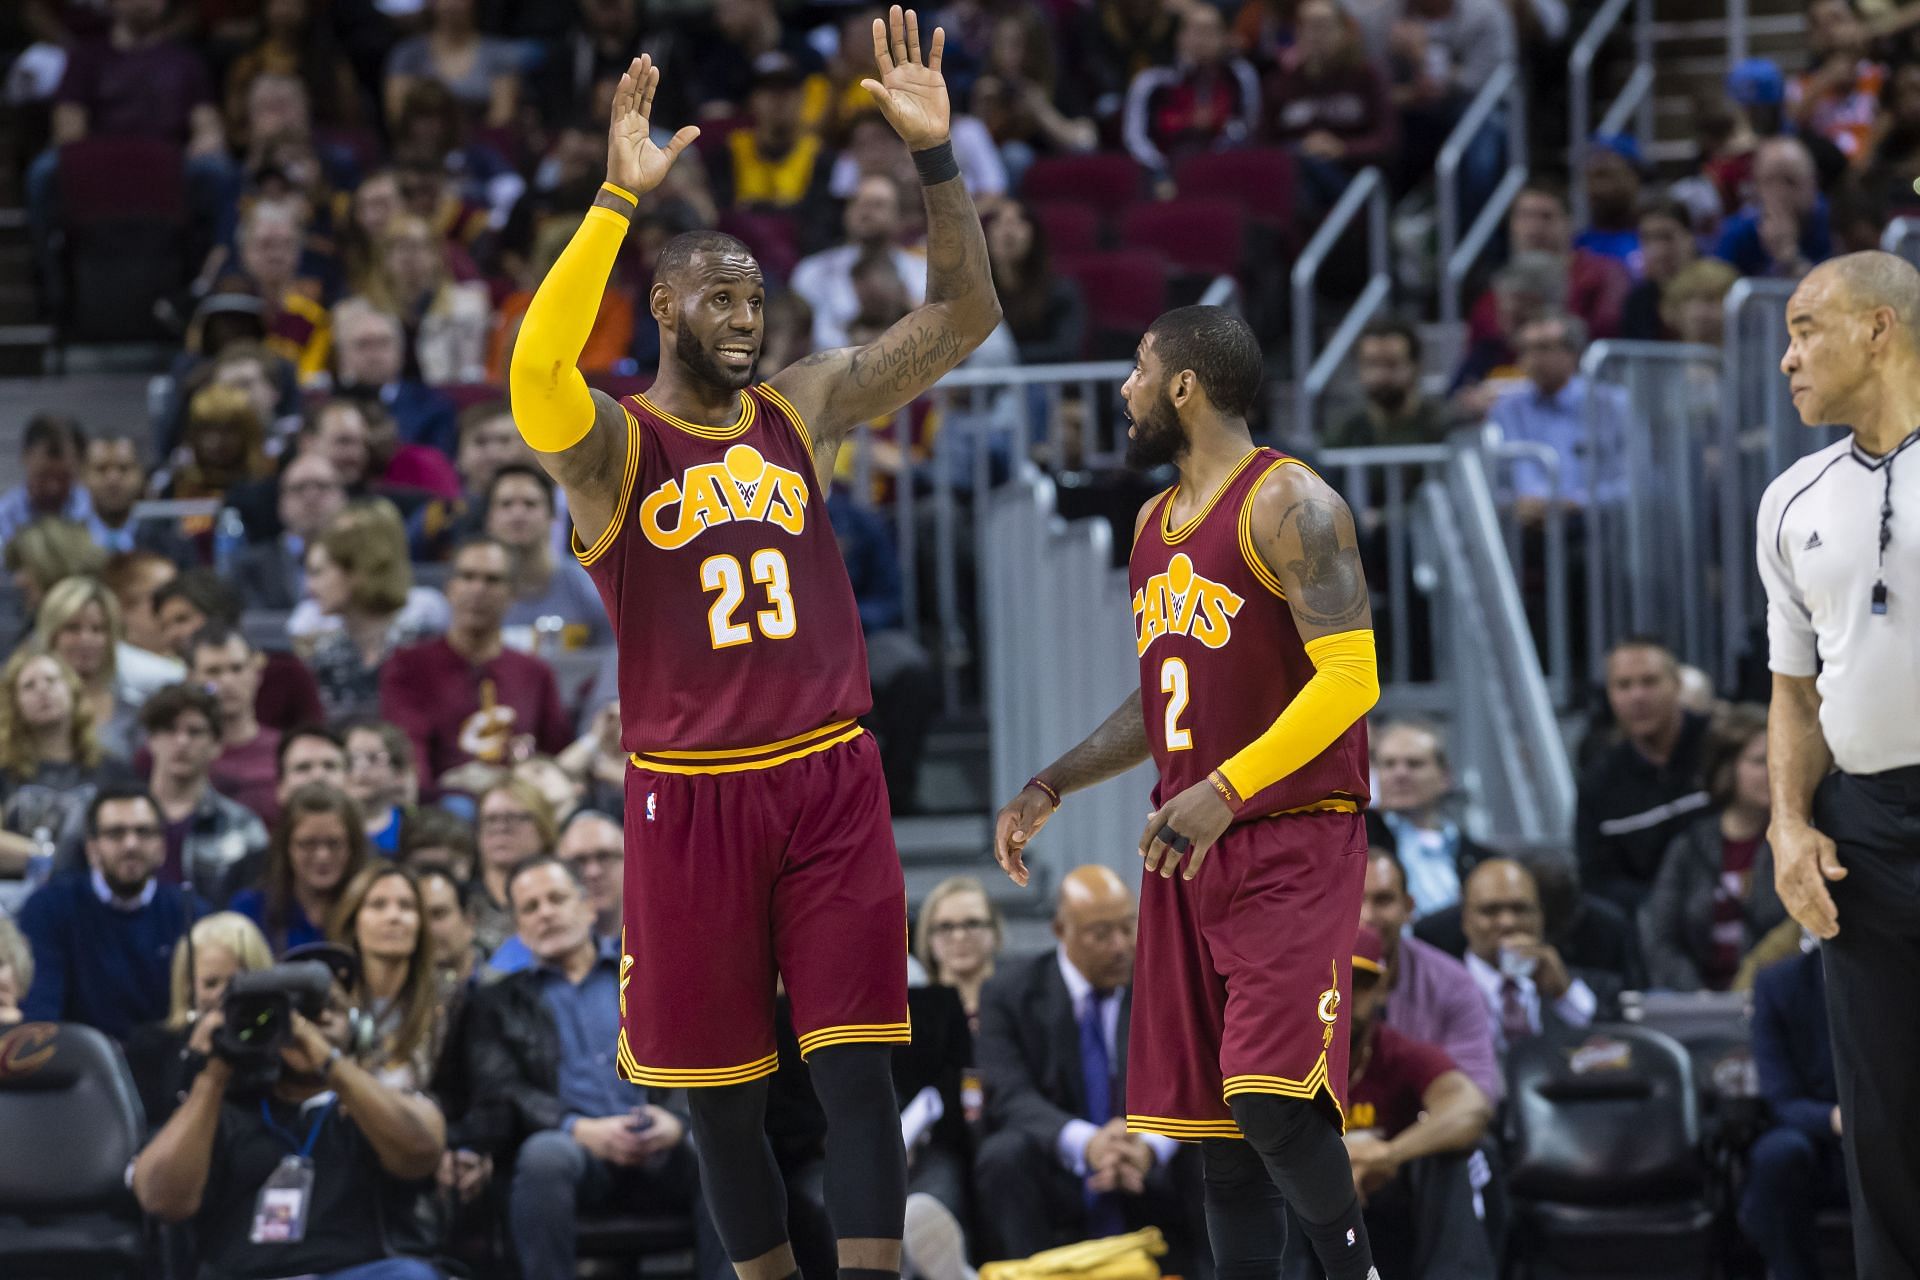 Michael Wilbon believes LeBron James and Kyrie Irving could become teammates once again.